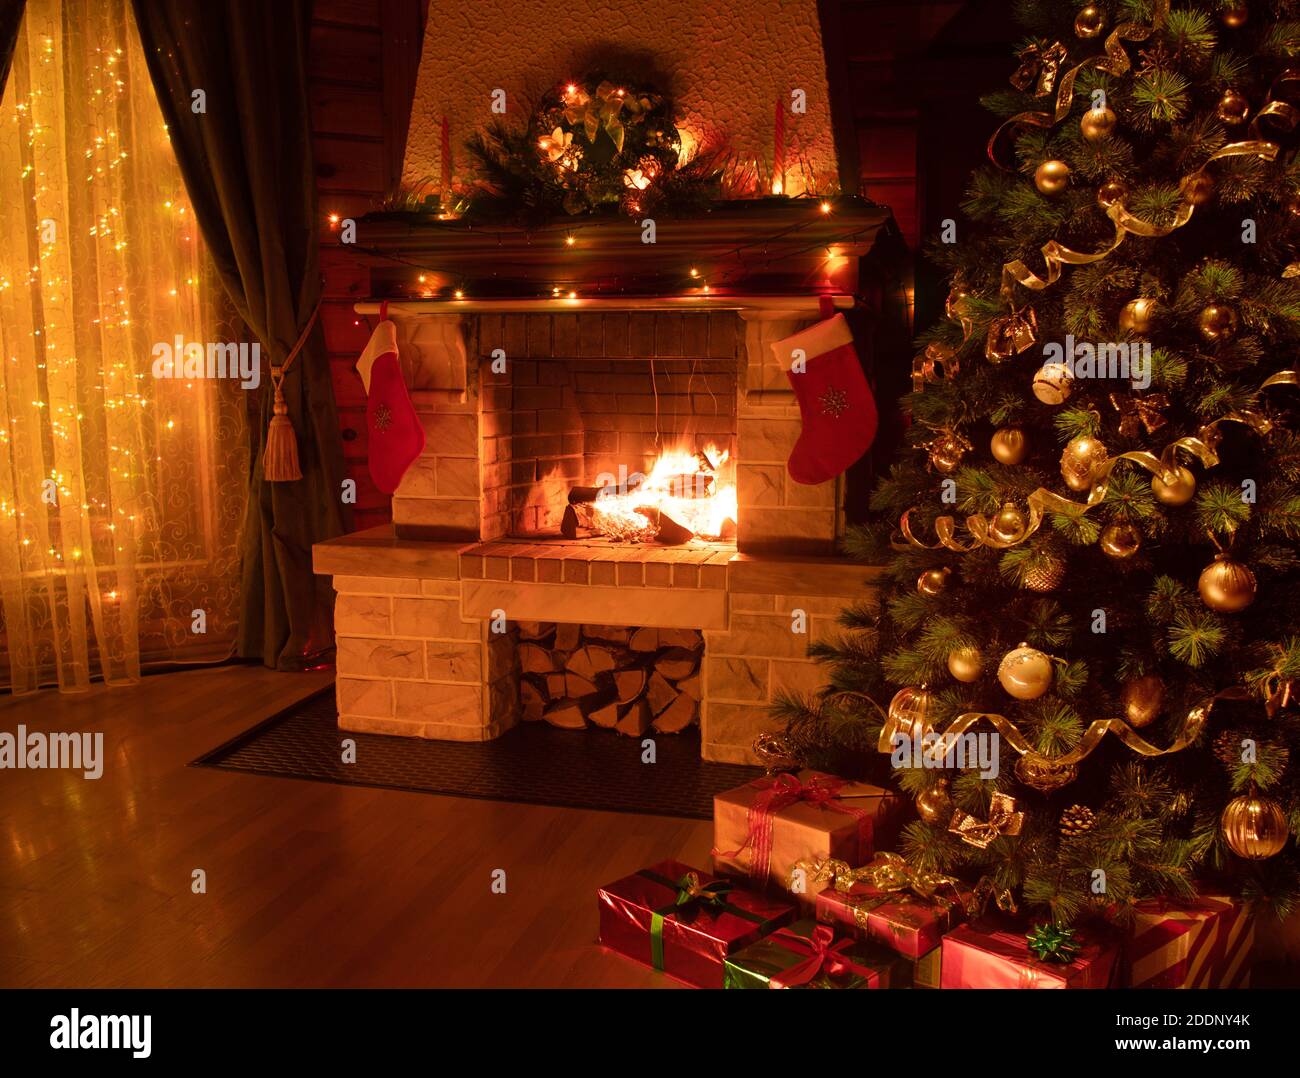 Christmas decorated tree in dark interior with fireplace and window ...